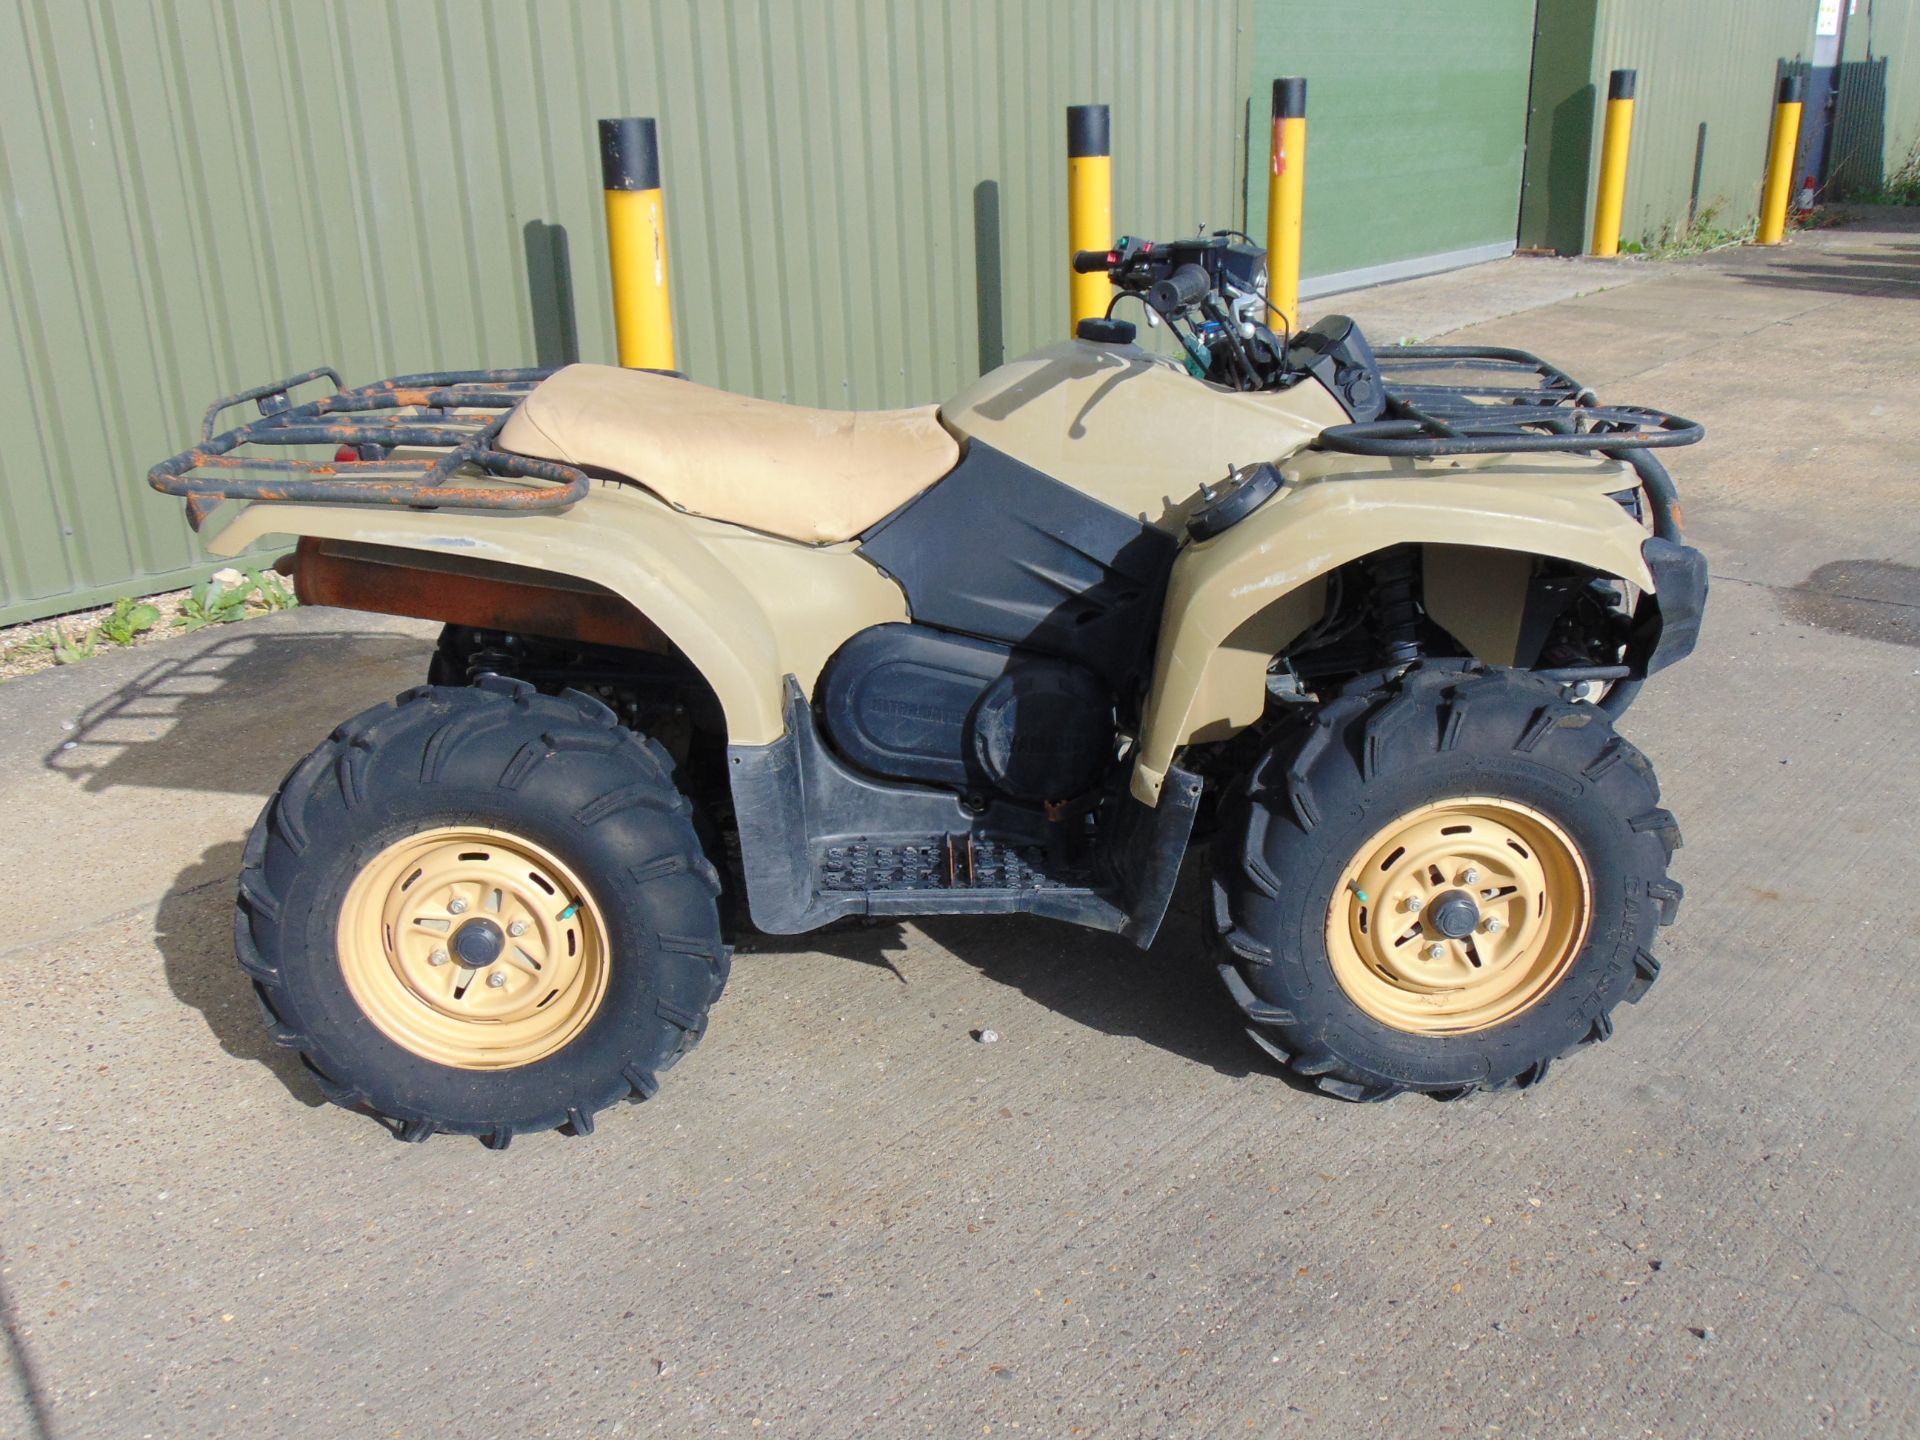 Military Specification Yamaha Grizzly 450 4 x 4 ATV Quad Bike - Image 5 of 14